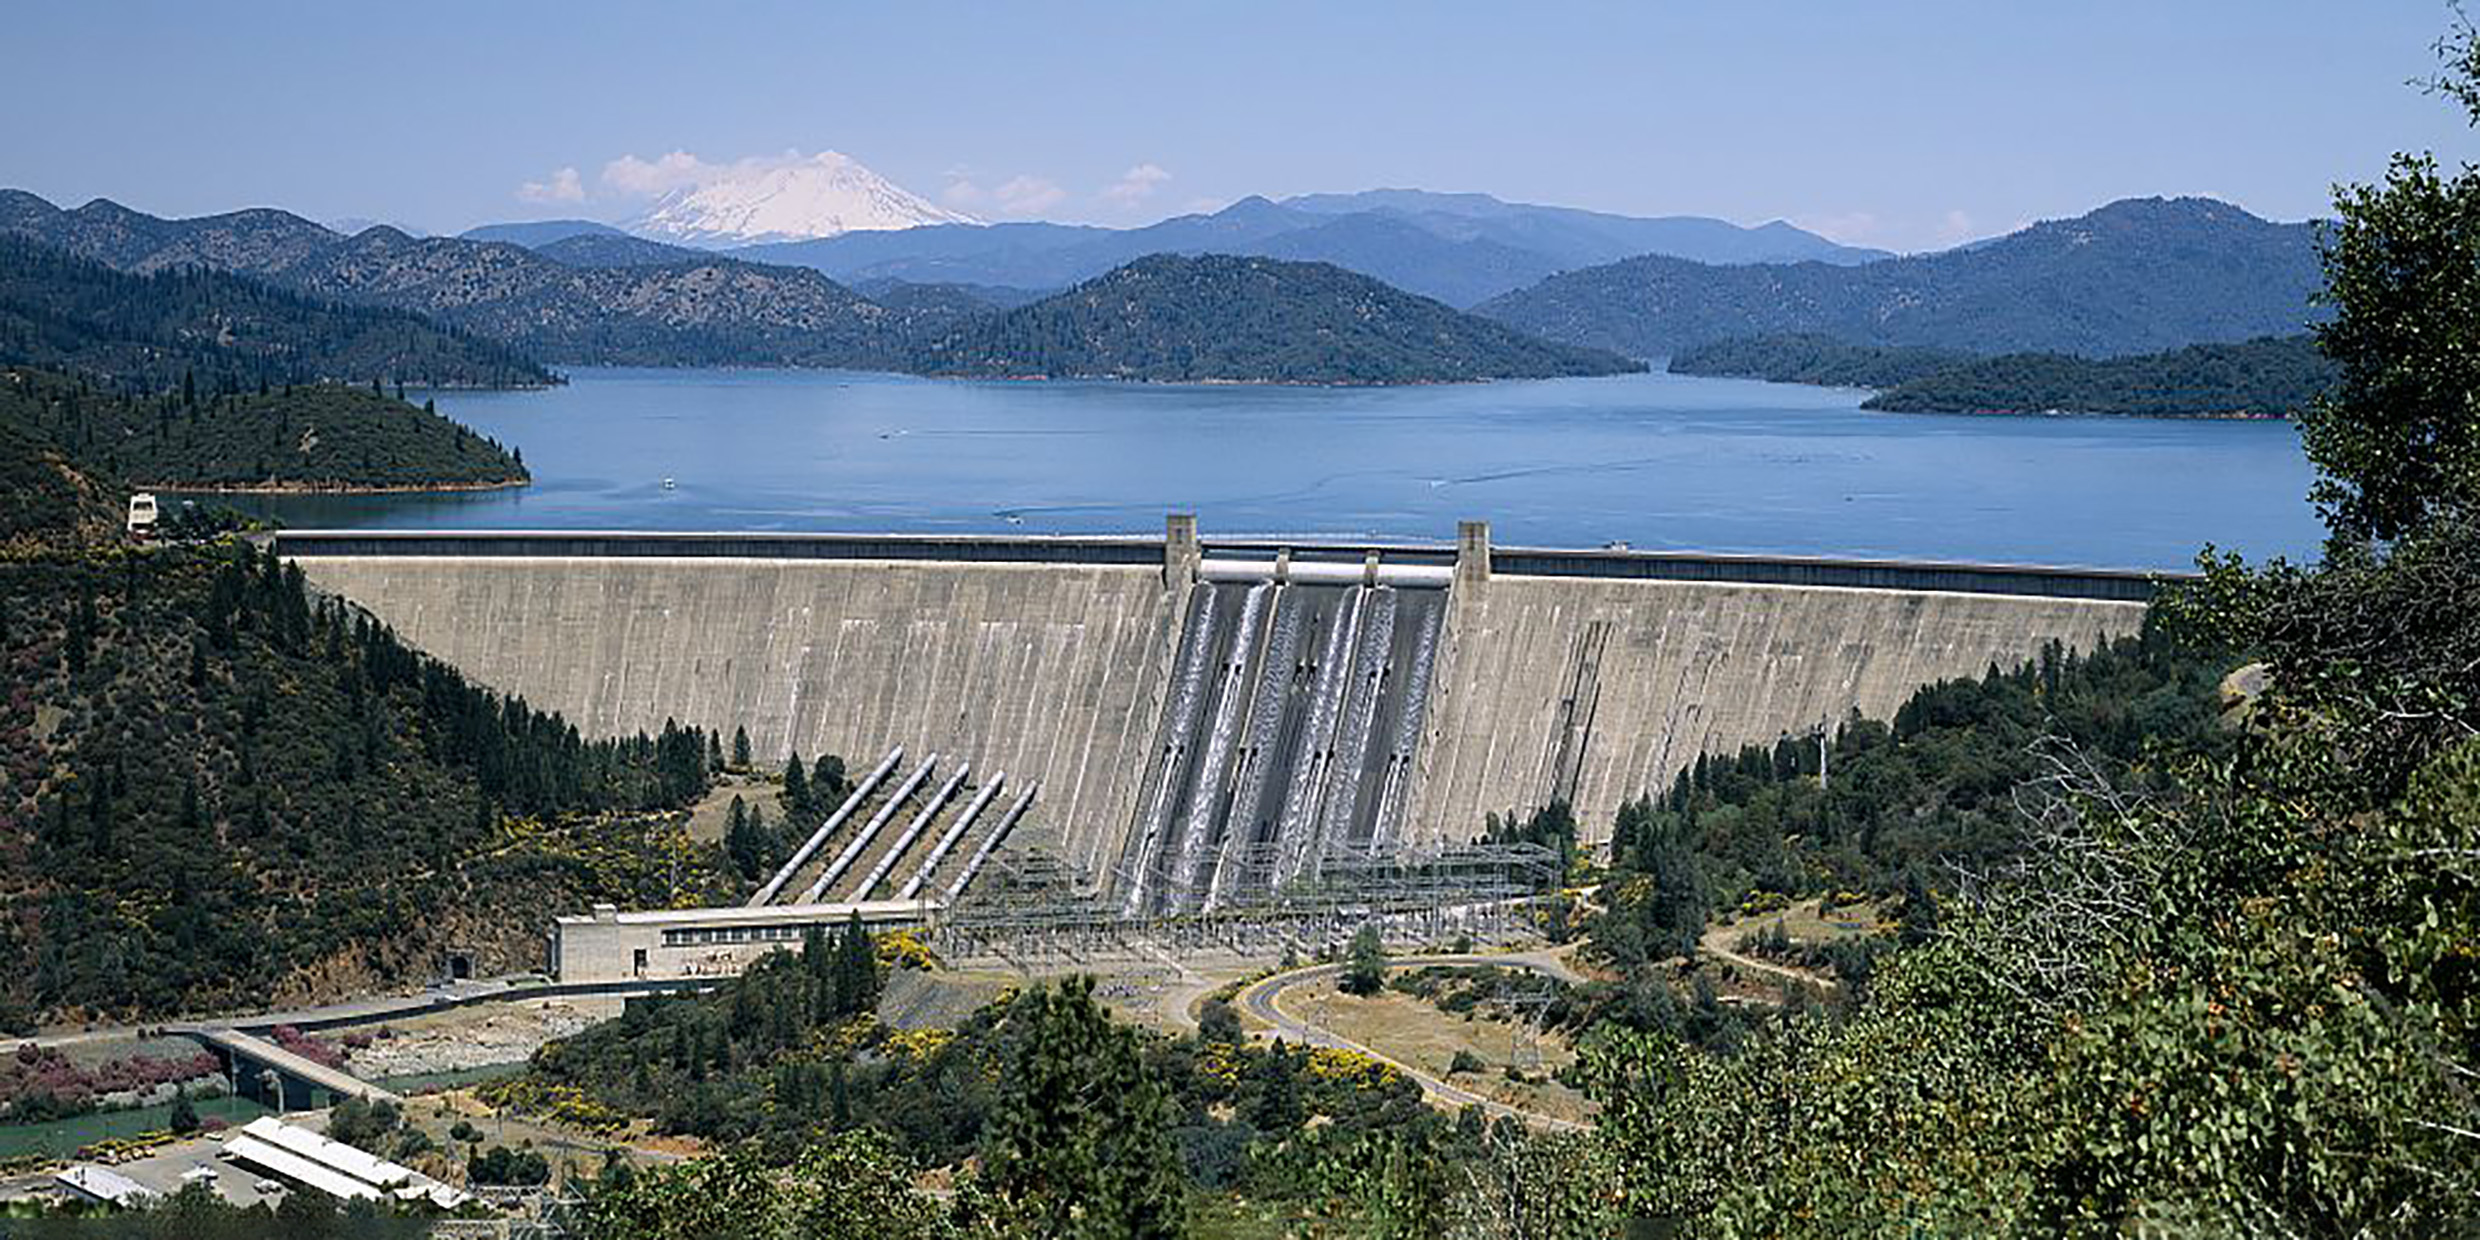 Image of concrete dam among rolling green hills